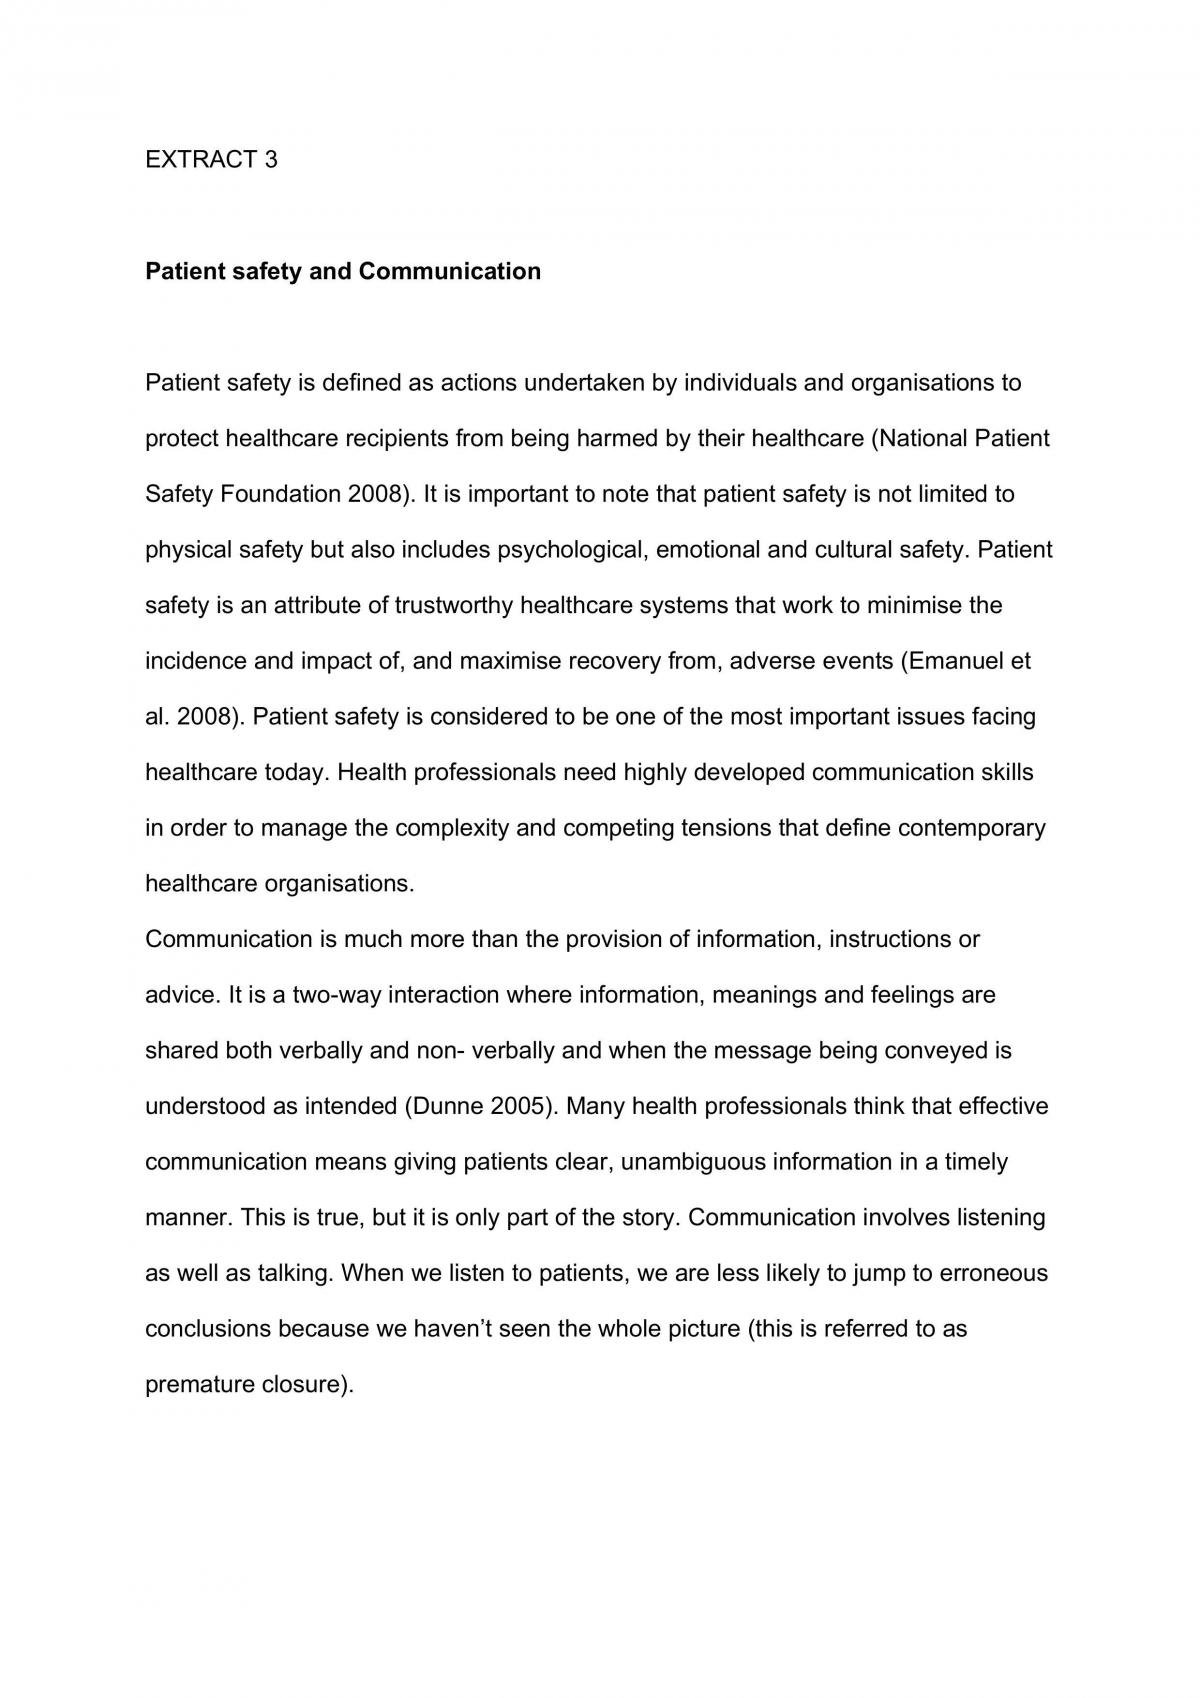 Patient safety and communication  - Page 1